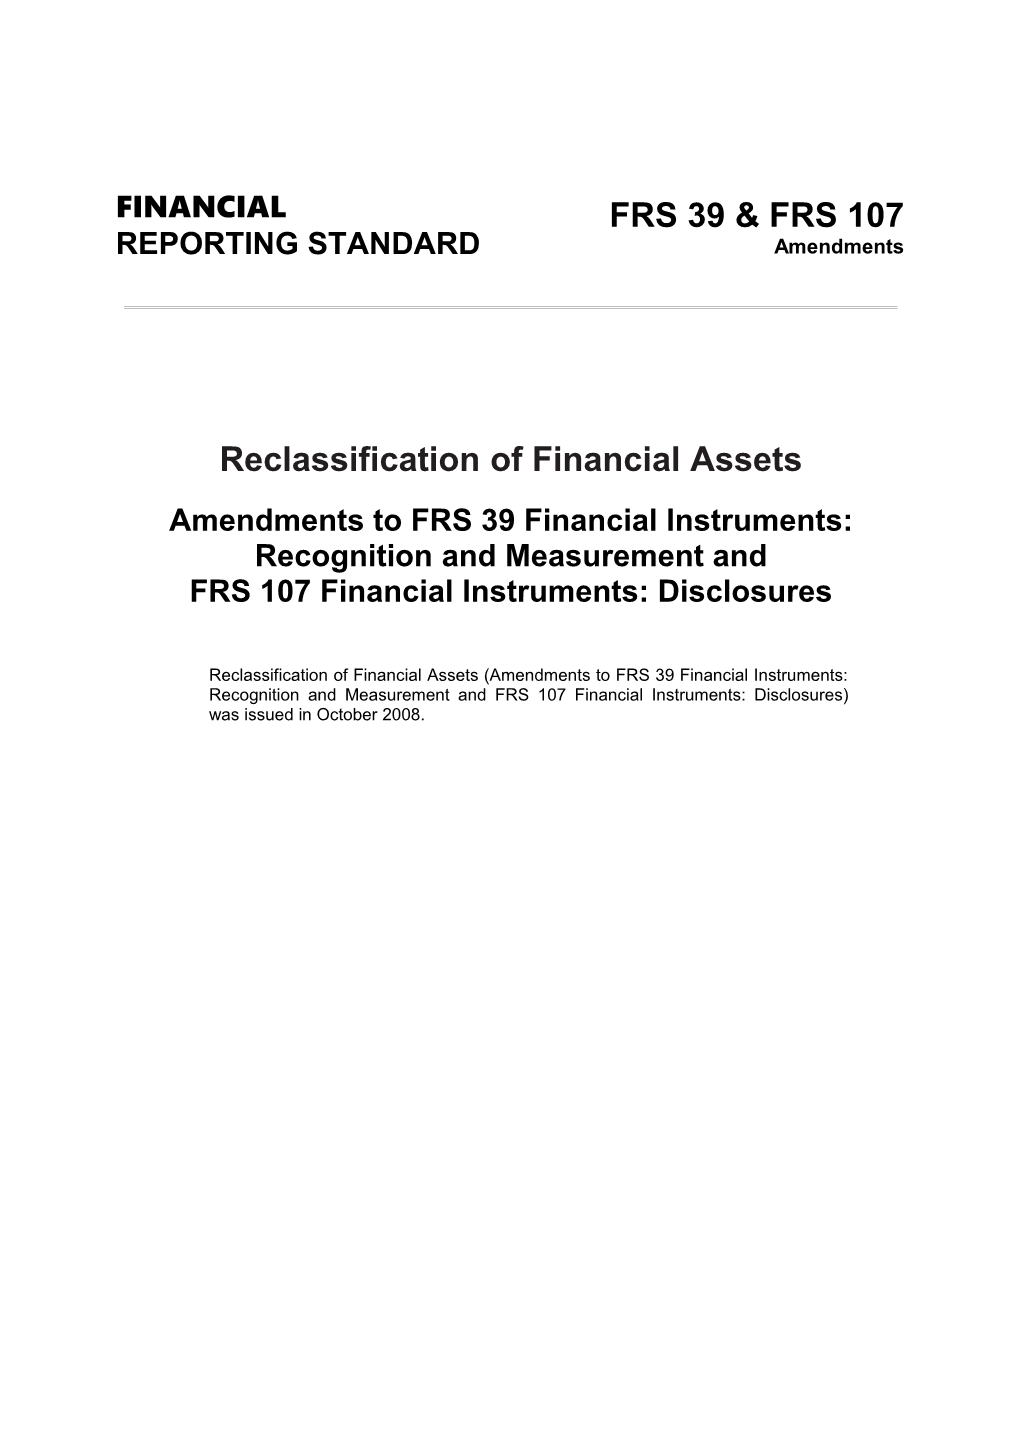 Amdments to IAS 39 and IFRS 7.Fm